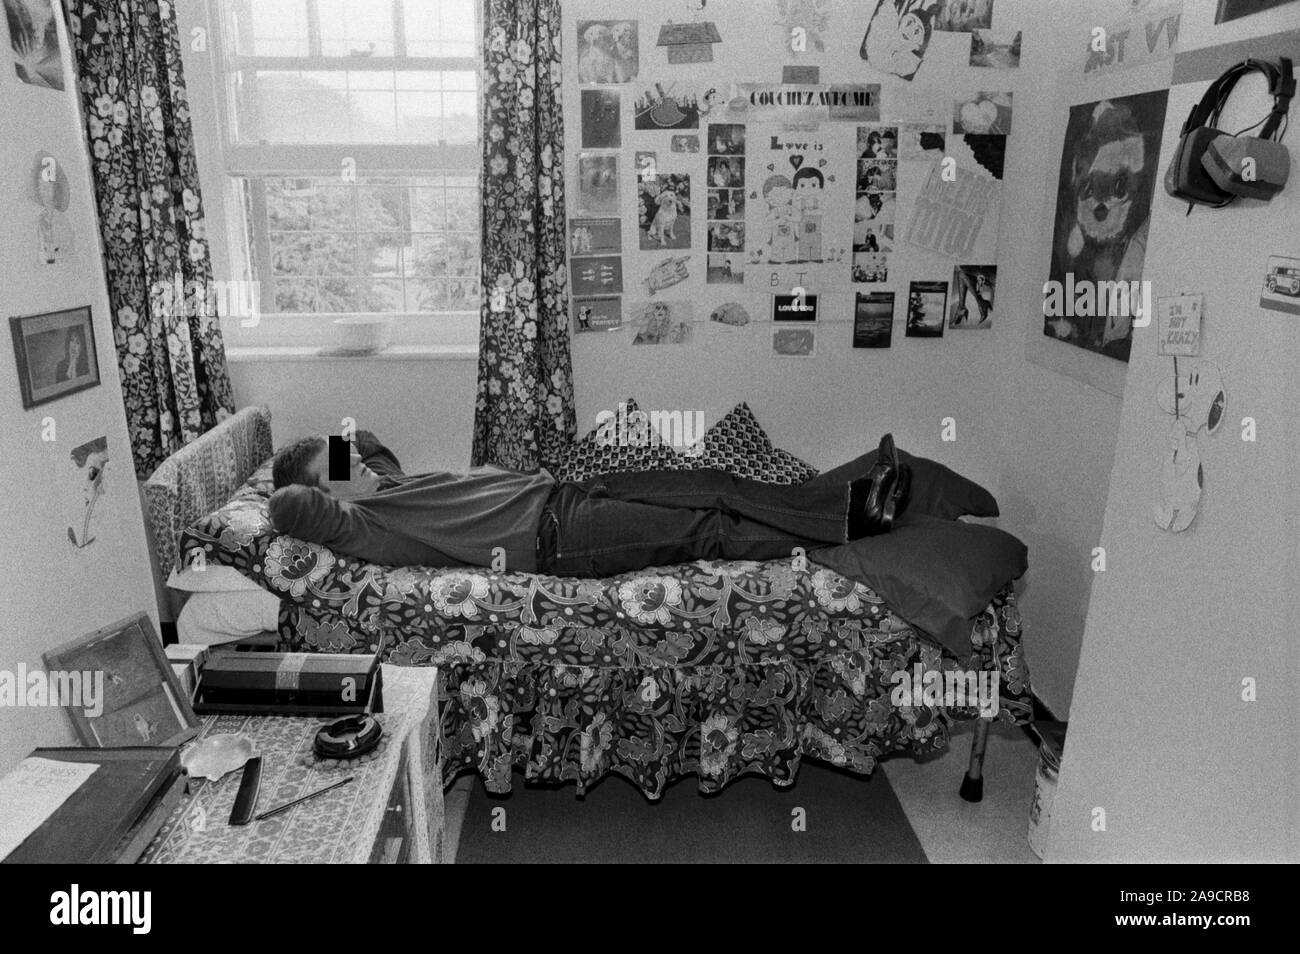 Woman in prison cell UK 1980s. Female inmate prisoner lying on bed with her possessions, photographs and drawing stuck to the wall of her cell as decoration. HM Prison Styal Wilmslow Cheshire England 1986 HOMER SYKES Stock Photo